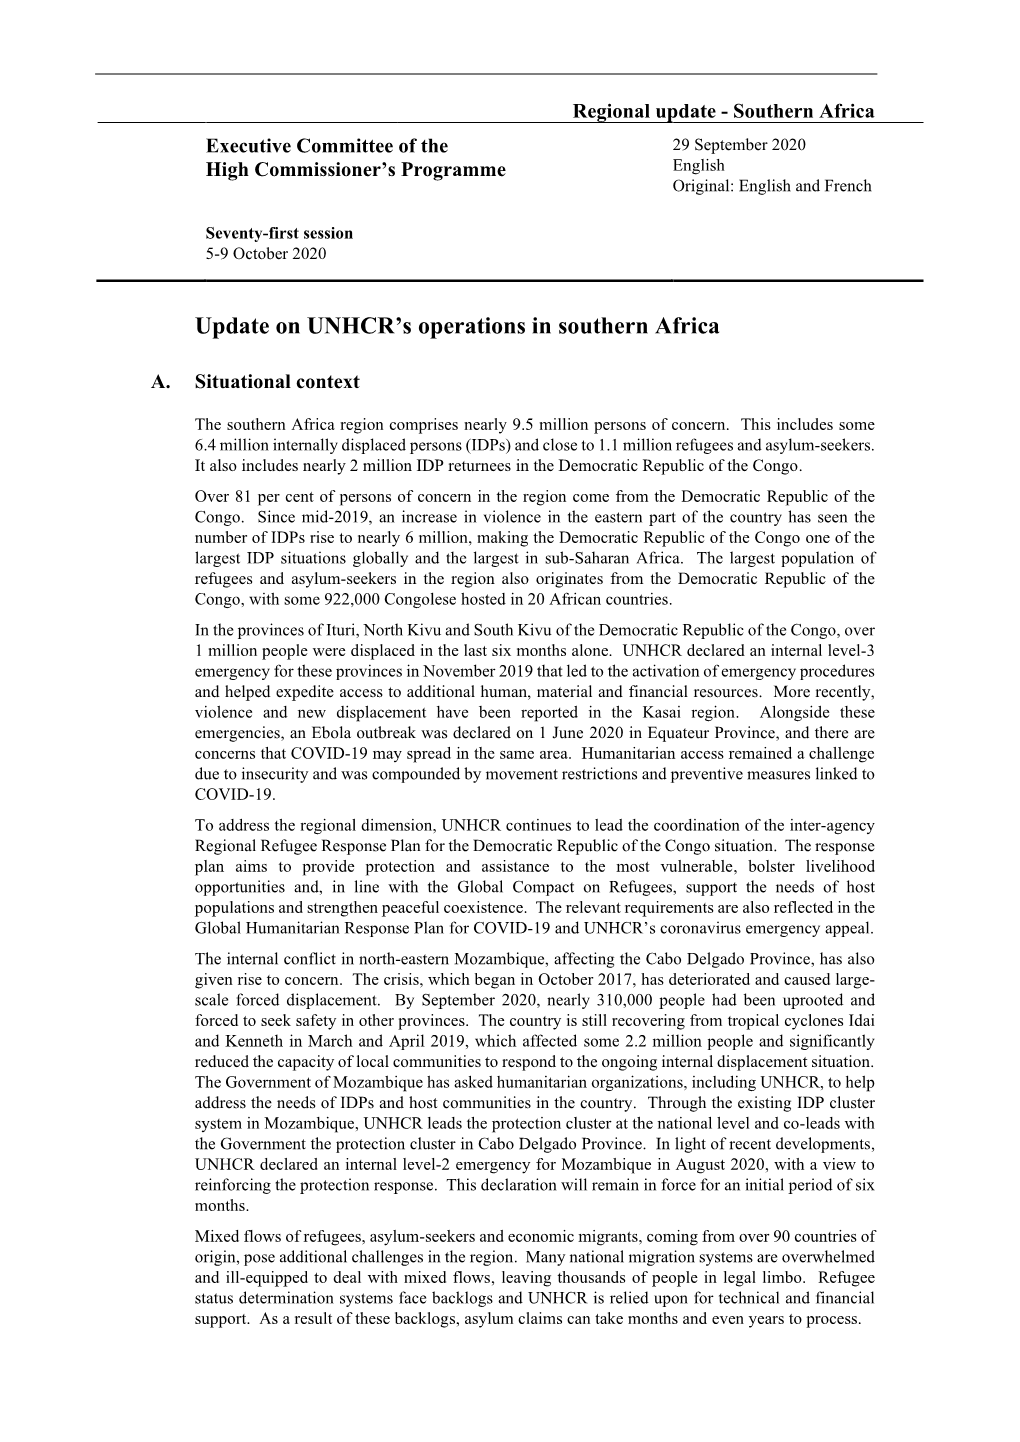 Update on UNHCR's Operations in Southern Africa